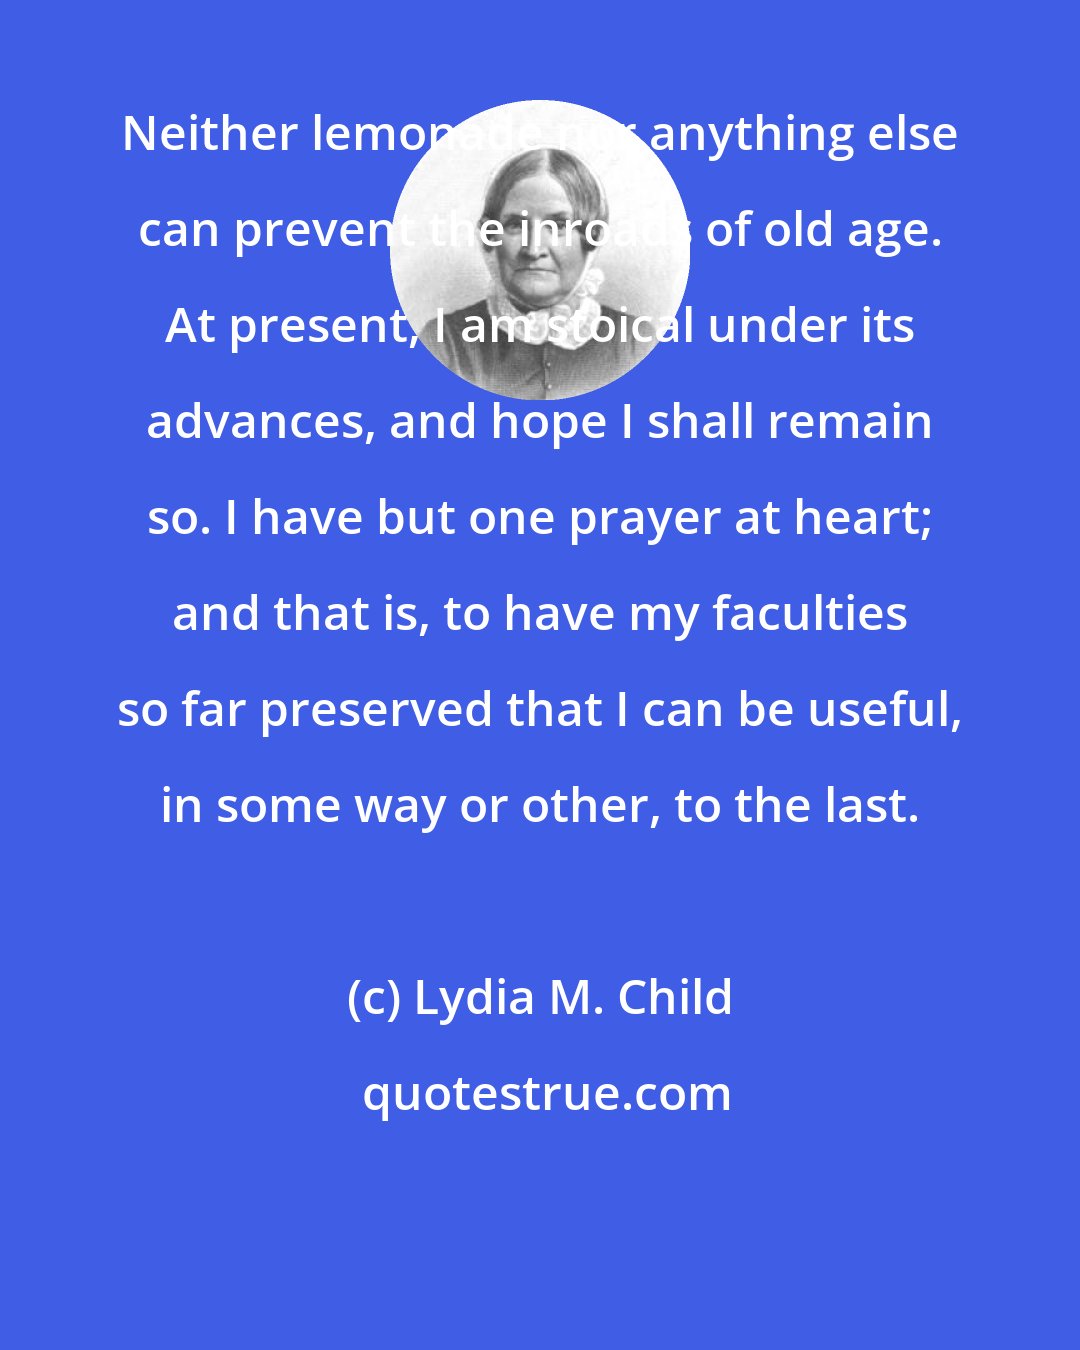 Lydia M. Child: Neither lemonade nor anything else can prevent the inroads of old age. At present, I am stoical under its advances, and hope I shall remain so. I have but one prayer at heart; and that is, to have my faculties so far preserved that I can be useful, in some way or other, to the last.